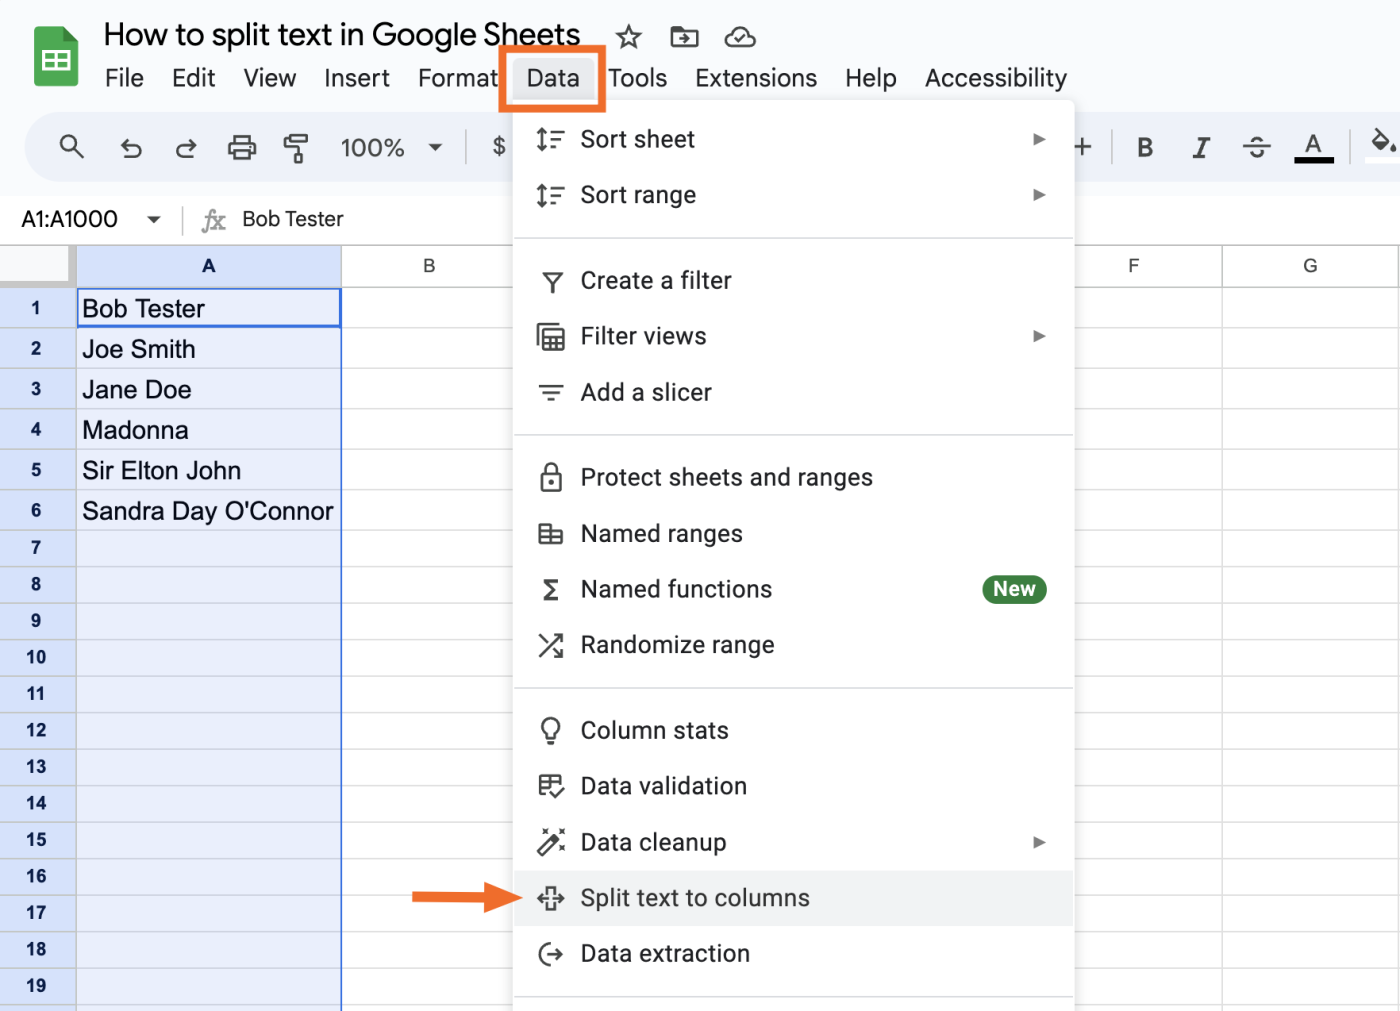 How to split text in Google Sheets using the split text to columns feature.